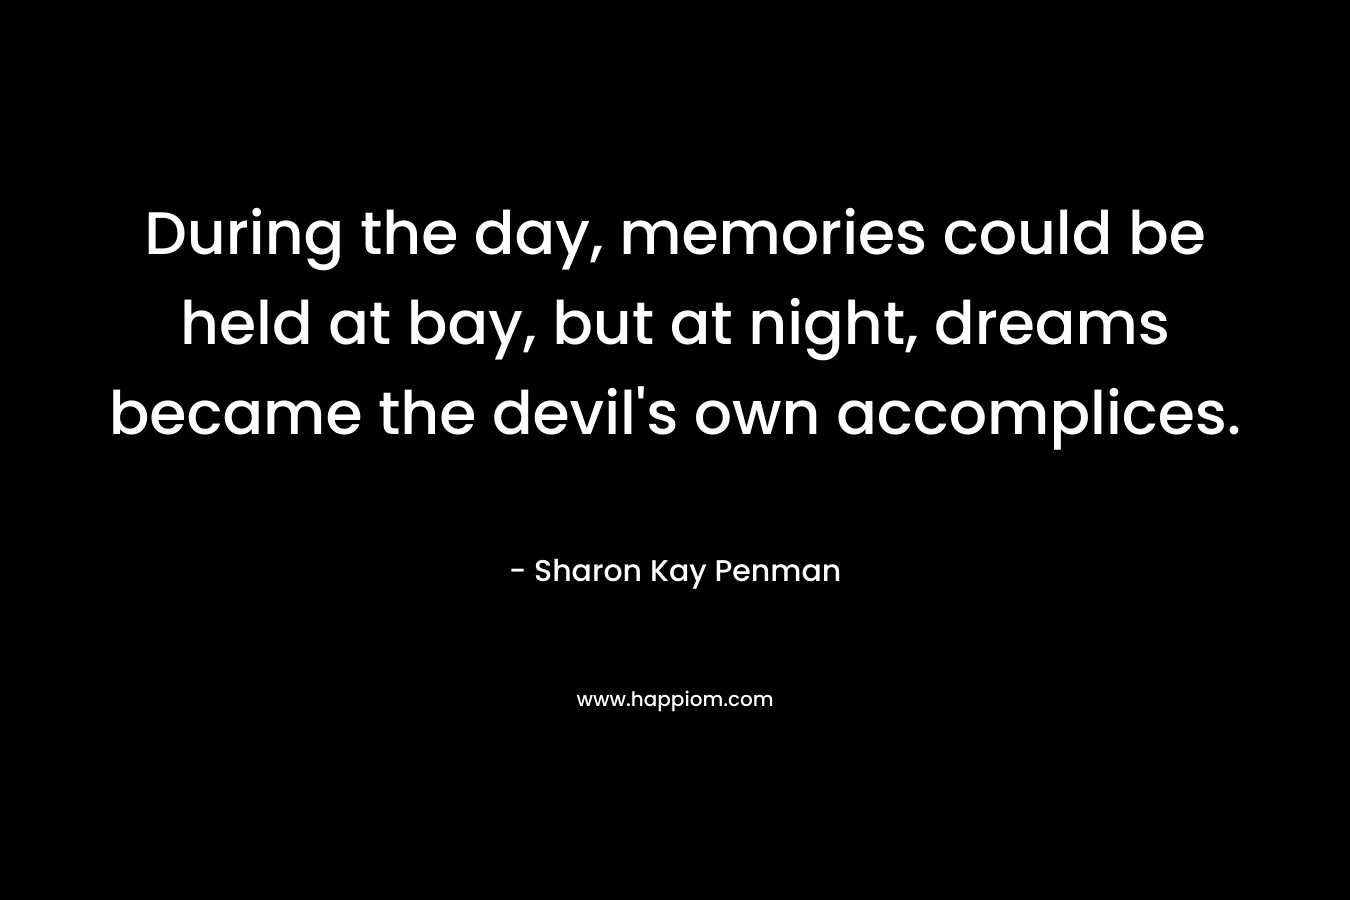 During the day, memories could be held at bay, but at night, dreams became the devil's own accomplices.